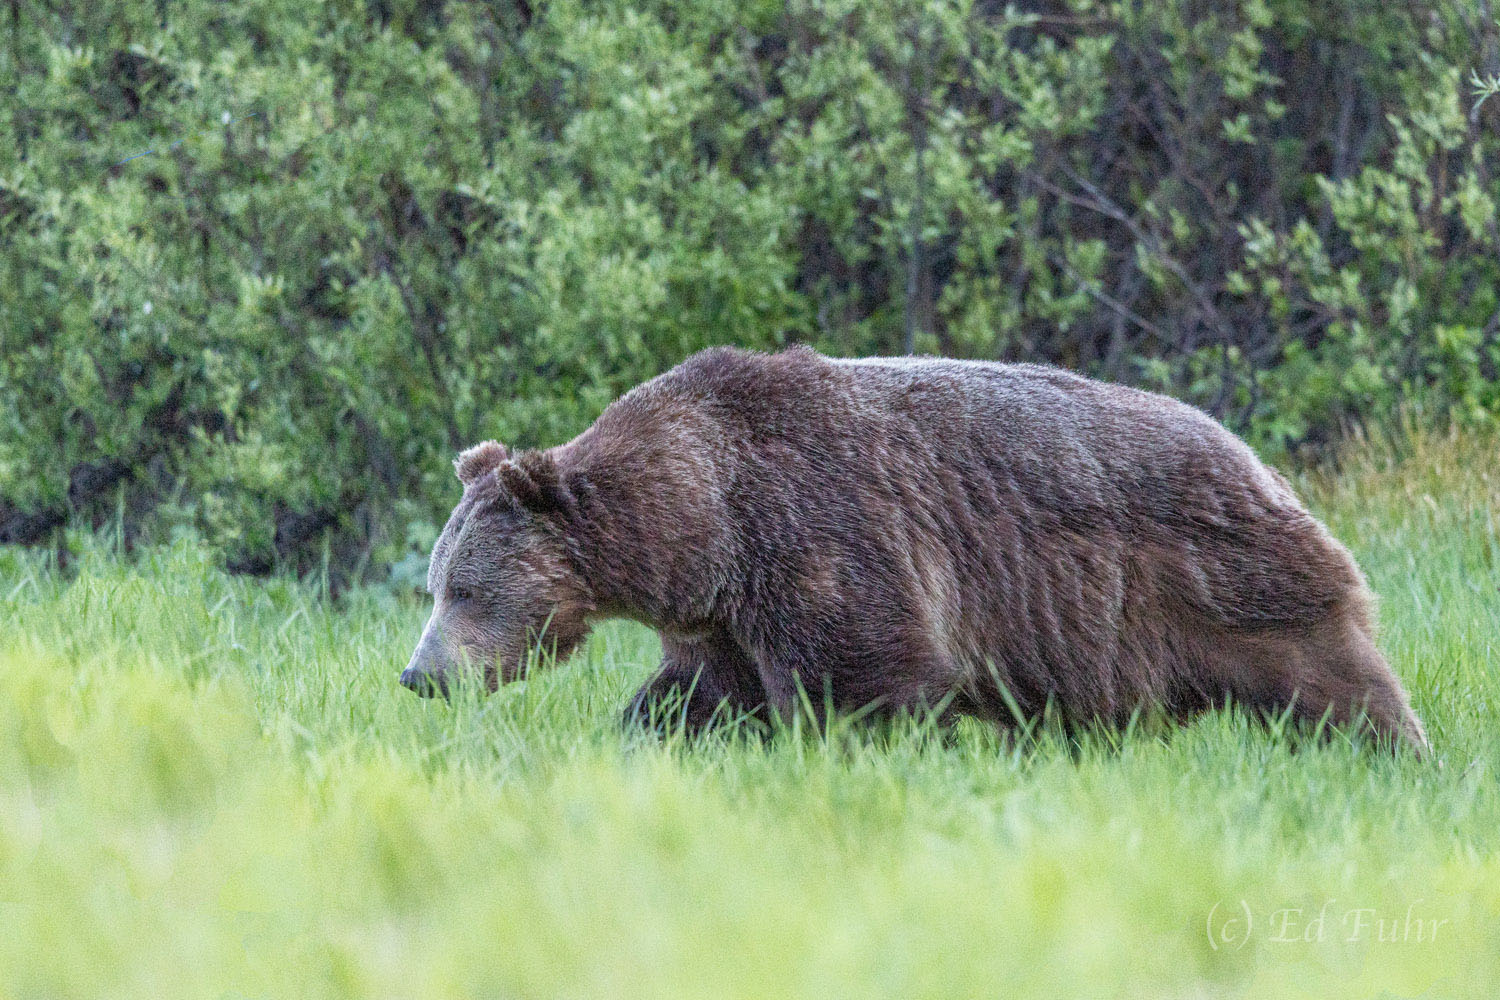 The apex predator in the Grand Teton kingdom, a large grizzly stalks his prey across the willow flats. He has sired many of the...